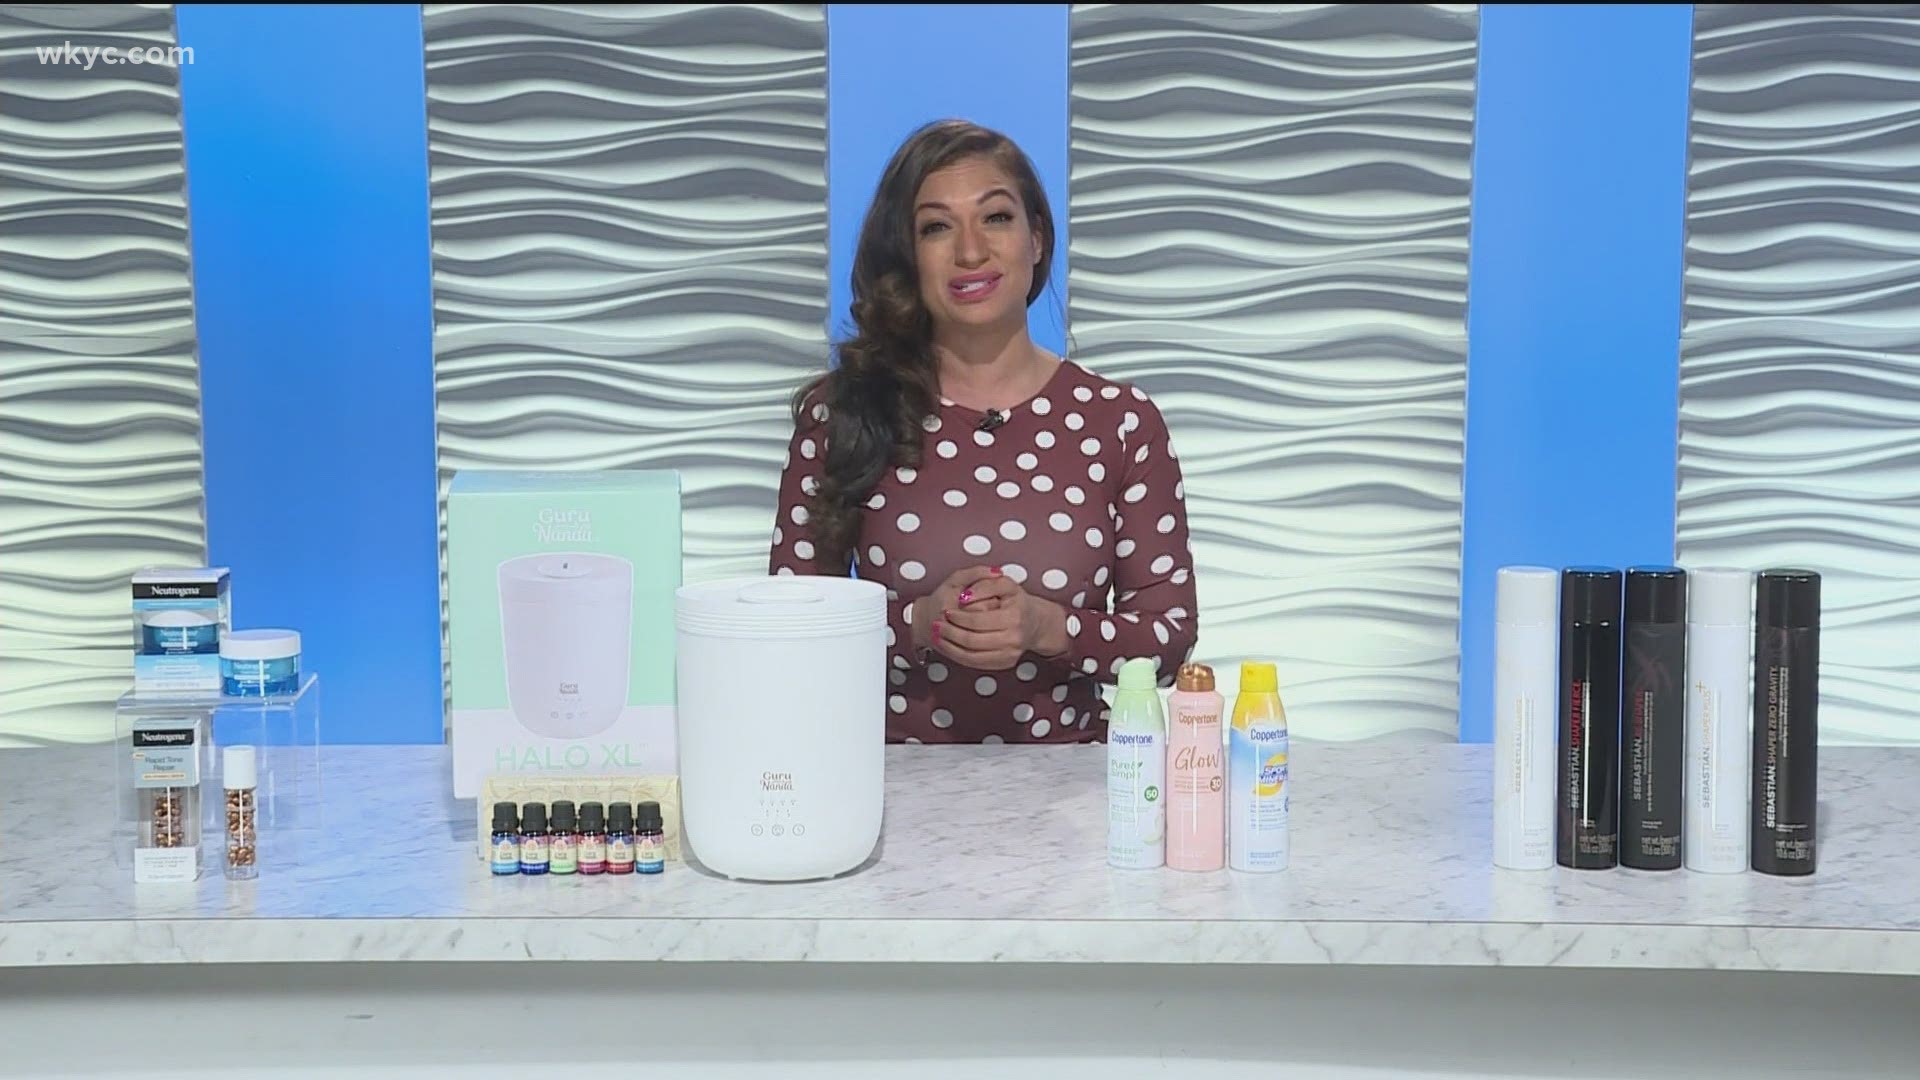 Milly Almodovar is here to showcase different products that will reverse the signs of aging and help your skin look healthier!